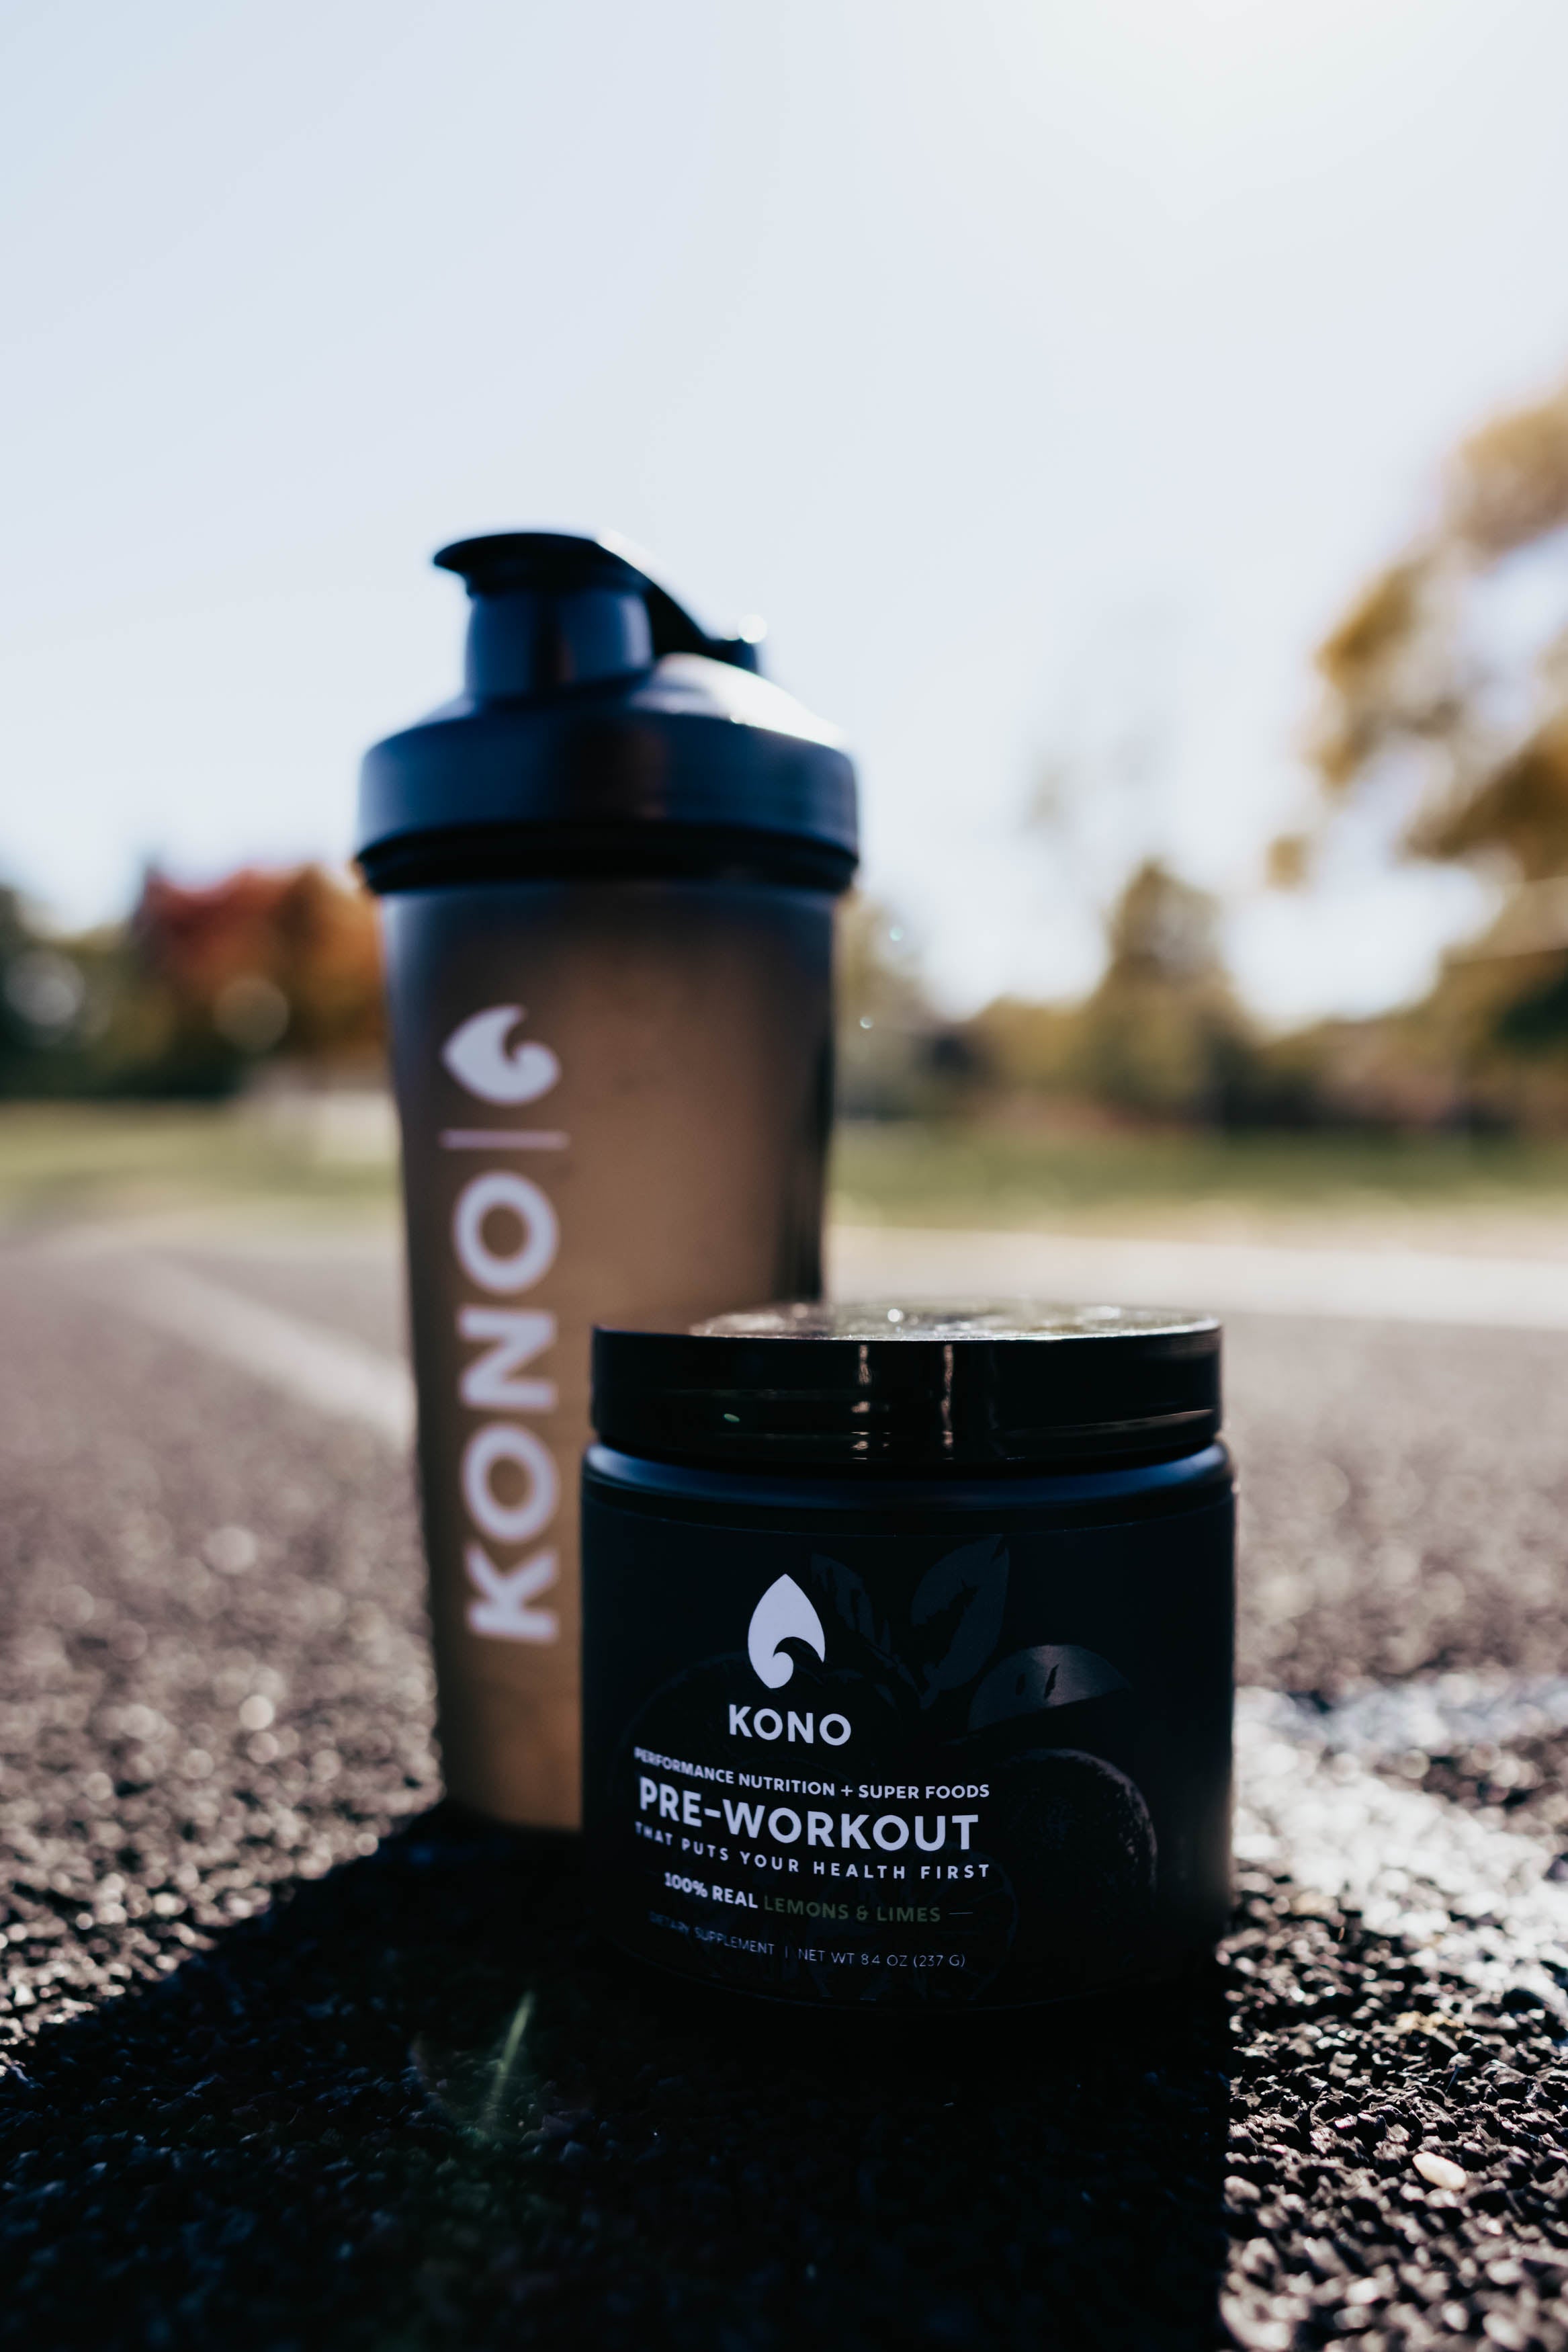 What's in your Pre-workout?